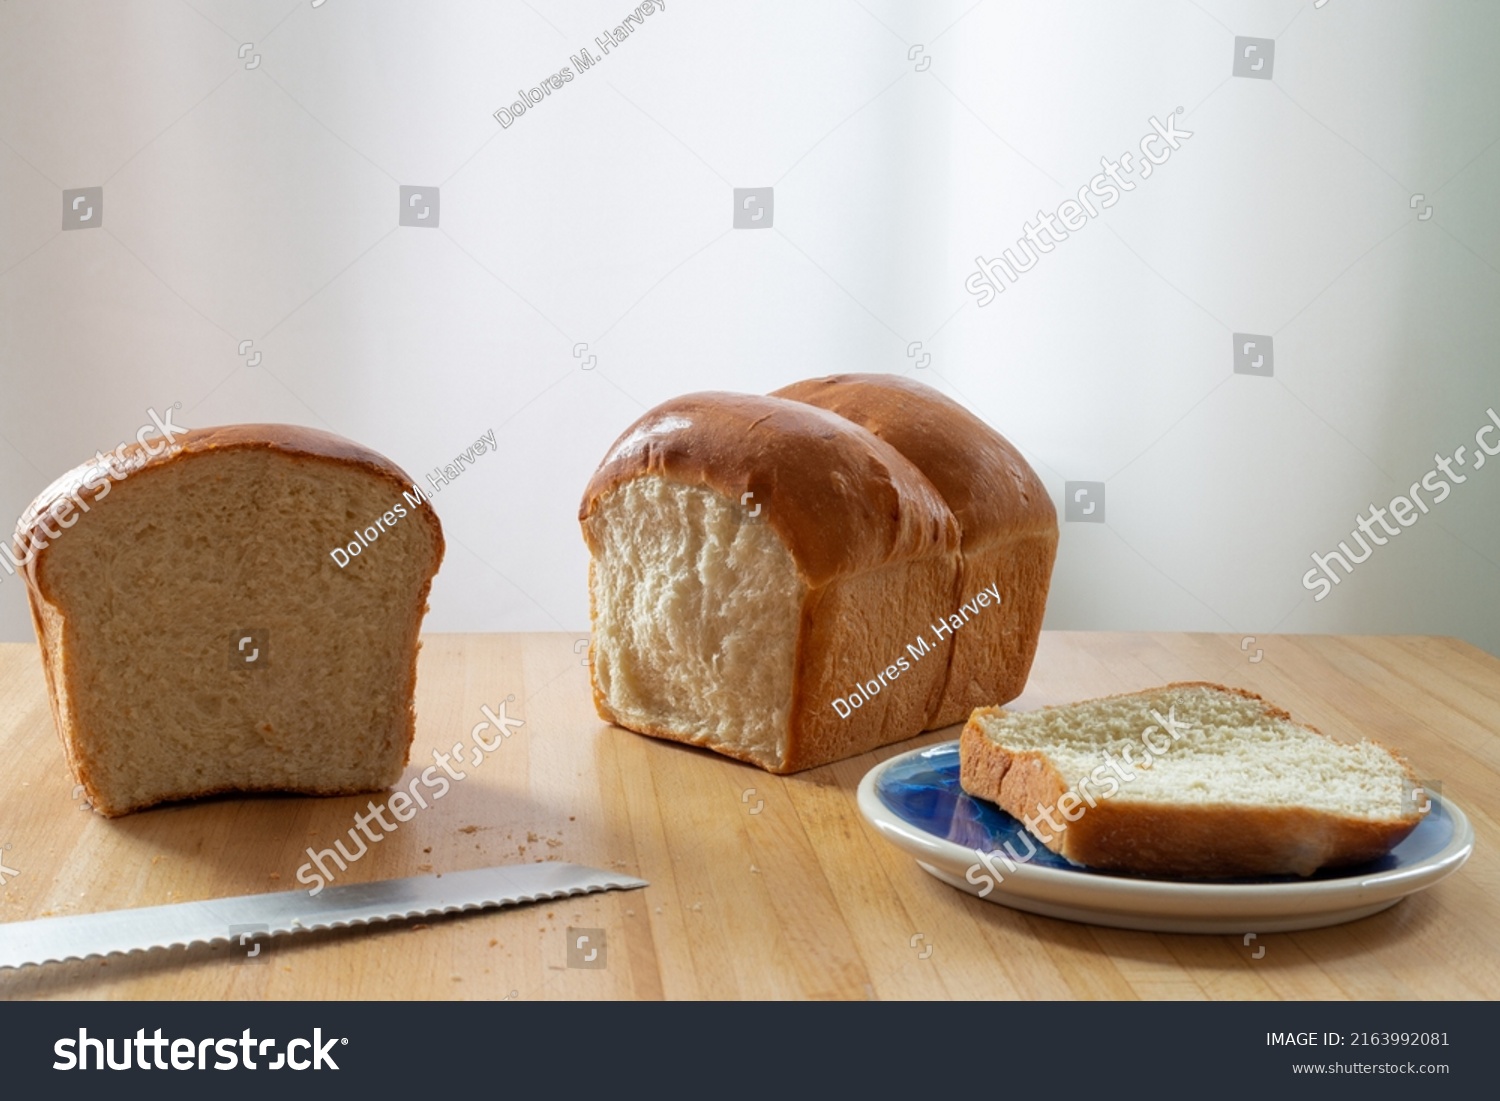 A single loaf of fresh white crusty bread on a wooden cutting board on a kitchen table. The warm crisp bun has melted butter over the crisp loaf buns. Side plates and a knife are next to the loaf.  #2163992081